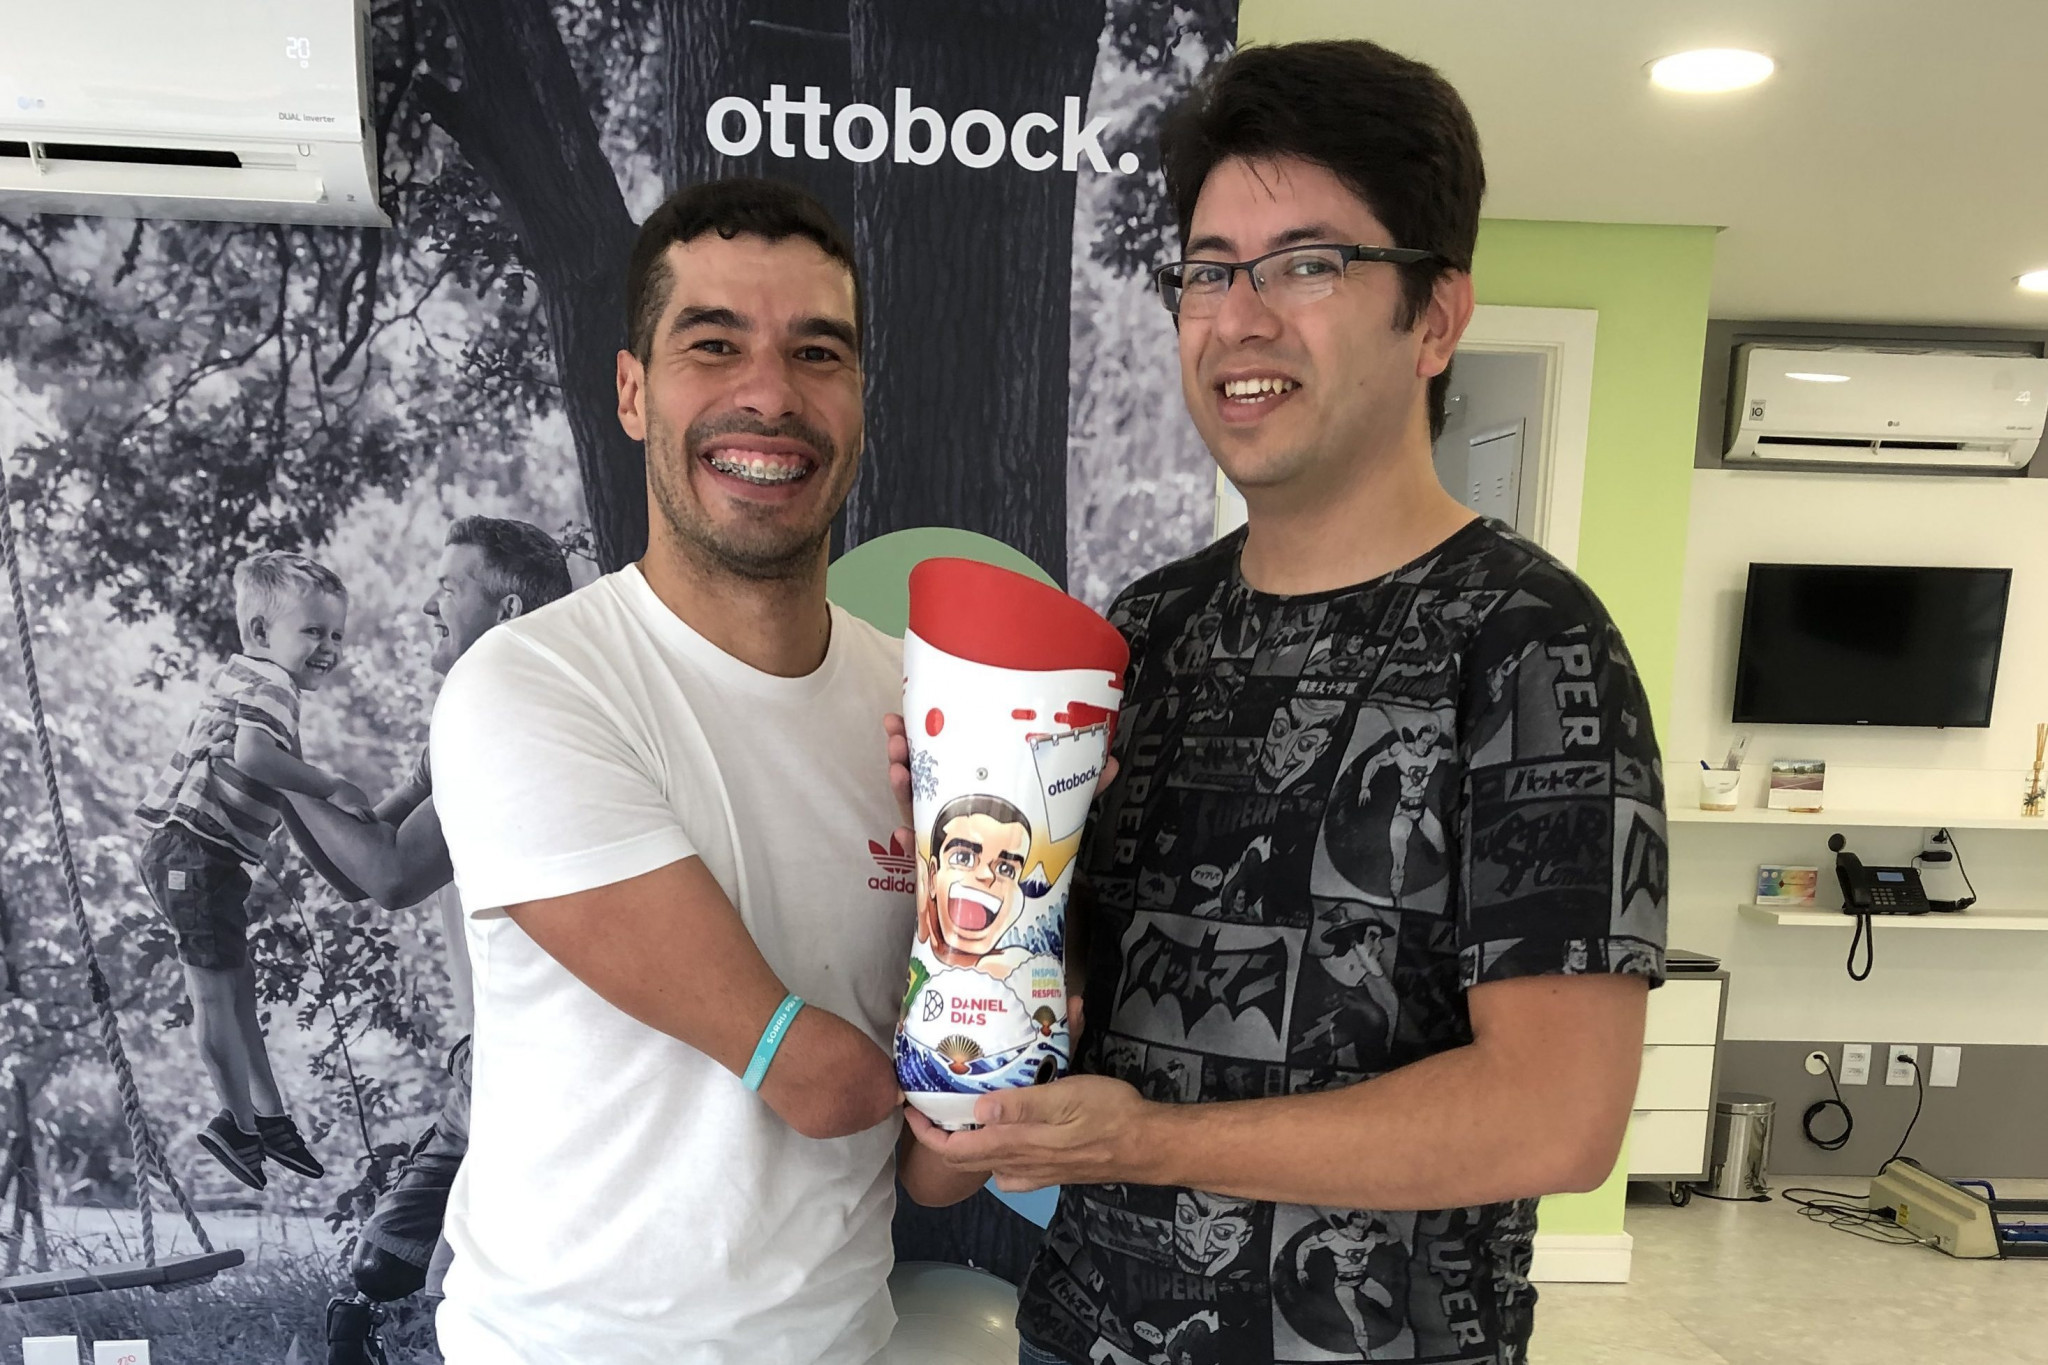 Brazil's multiple Paralympic swimming champion Dias gets manga-style prosthetic for Tokyo 2020